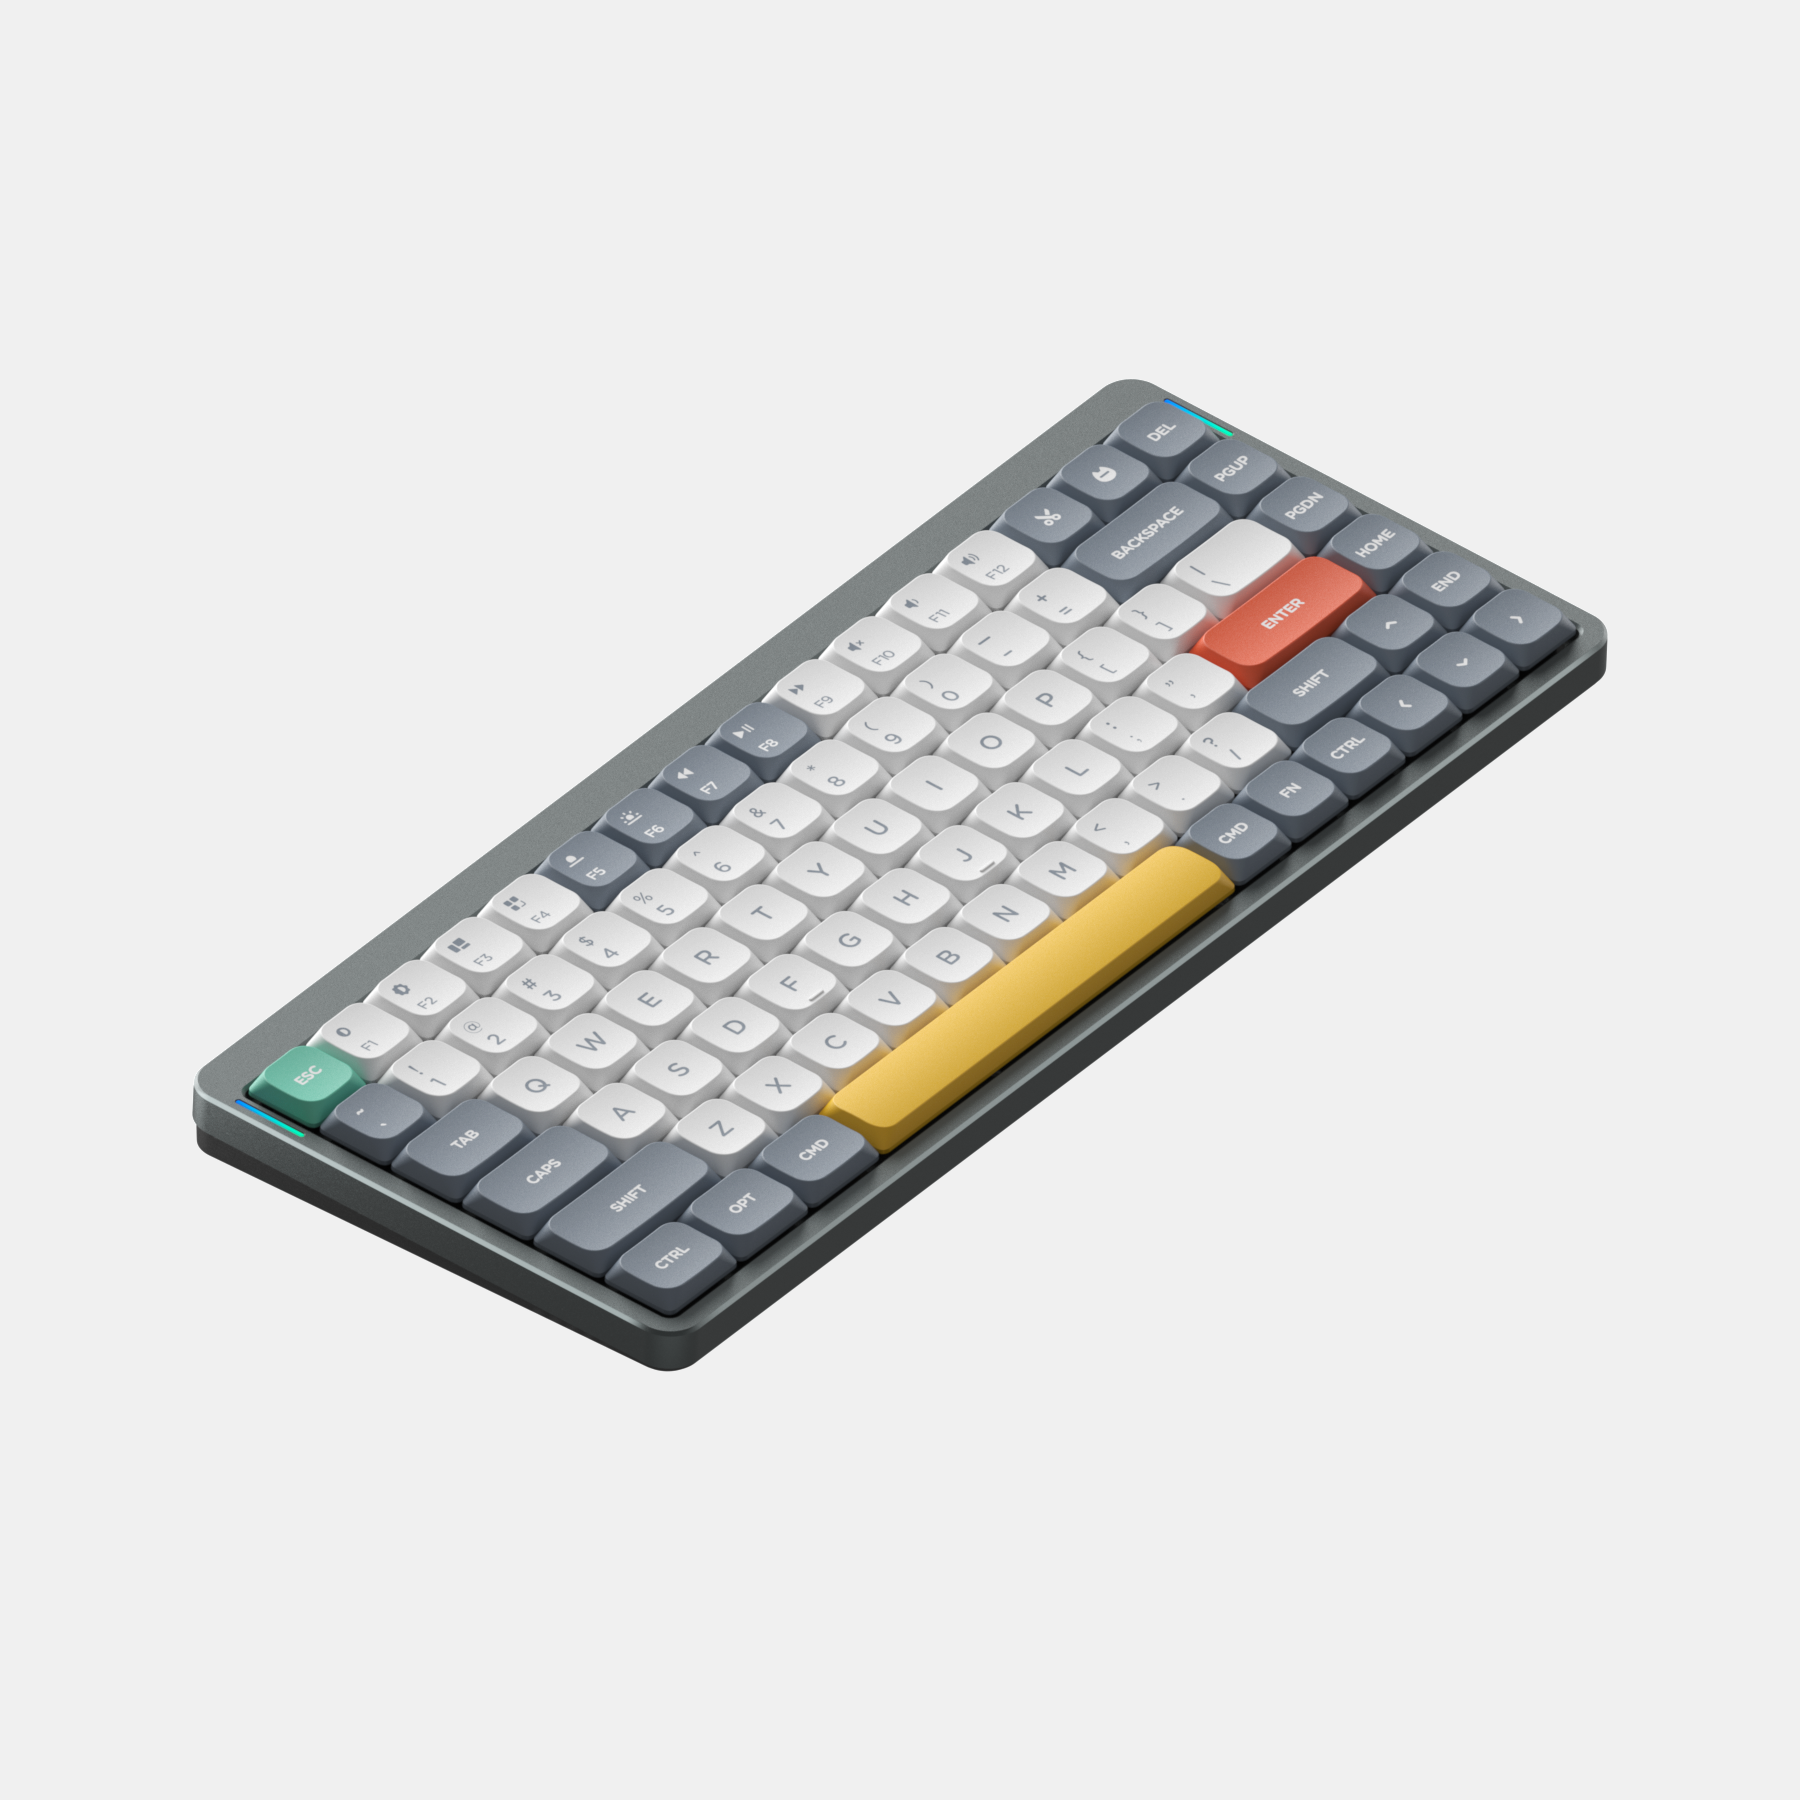 Low profile keycaps and keyboards